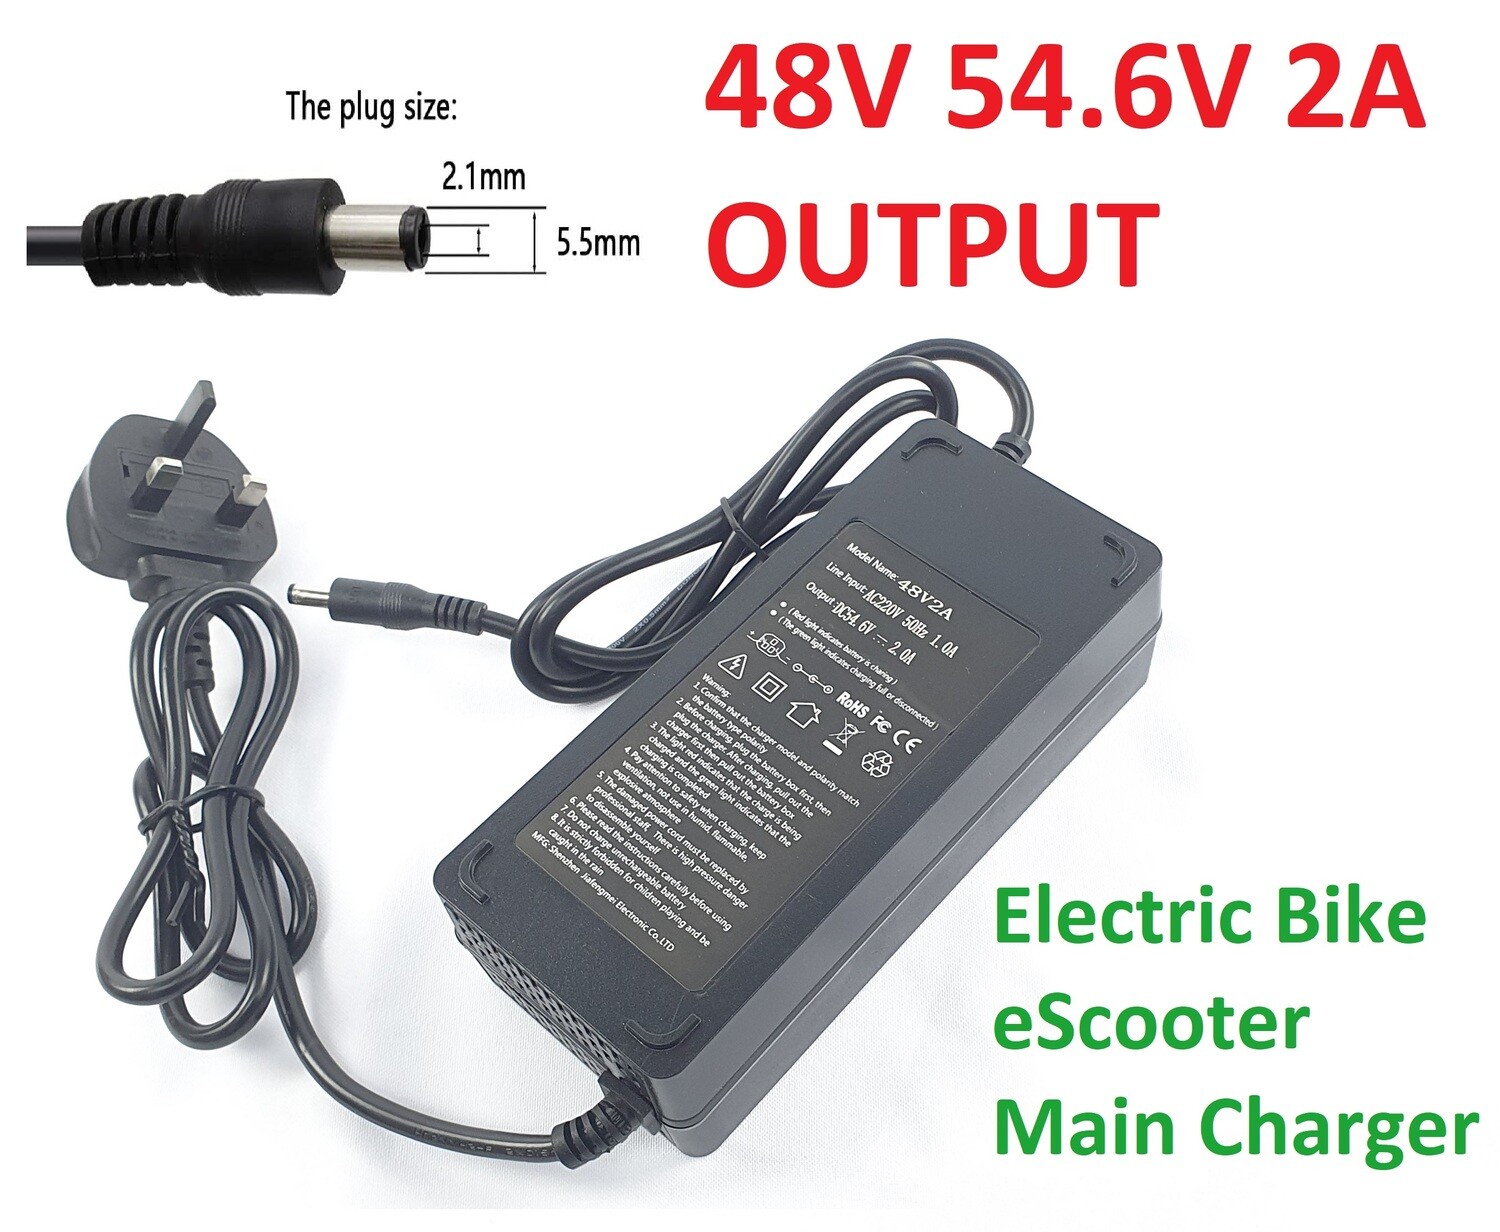 Electric Bicycle Main Charger For 48V Battery DC 54.6V 2A 2.1mm Pin